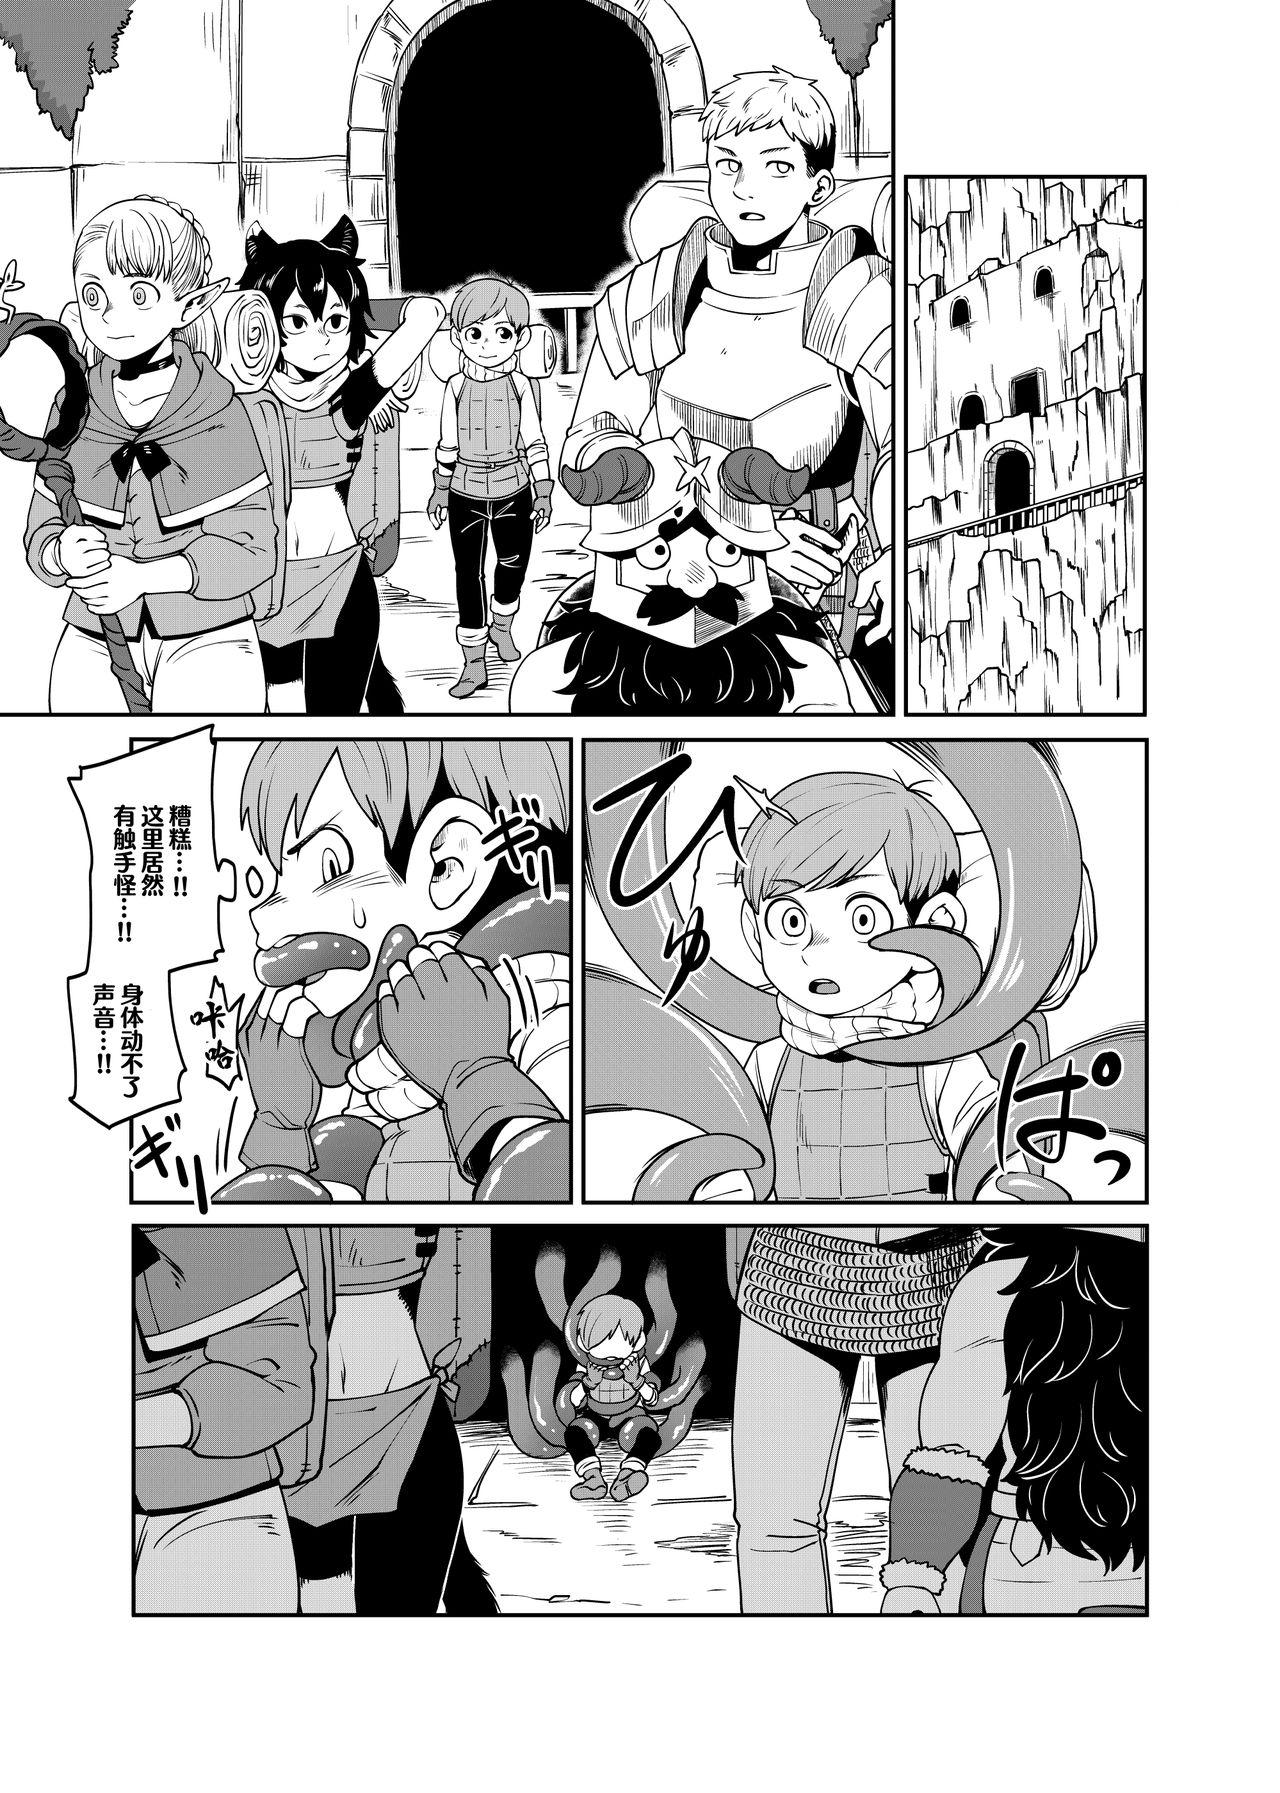 Young Chilchuck Meshi | 齐尔查克饭 - Dungeon meshi Amature - Page 3